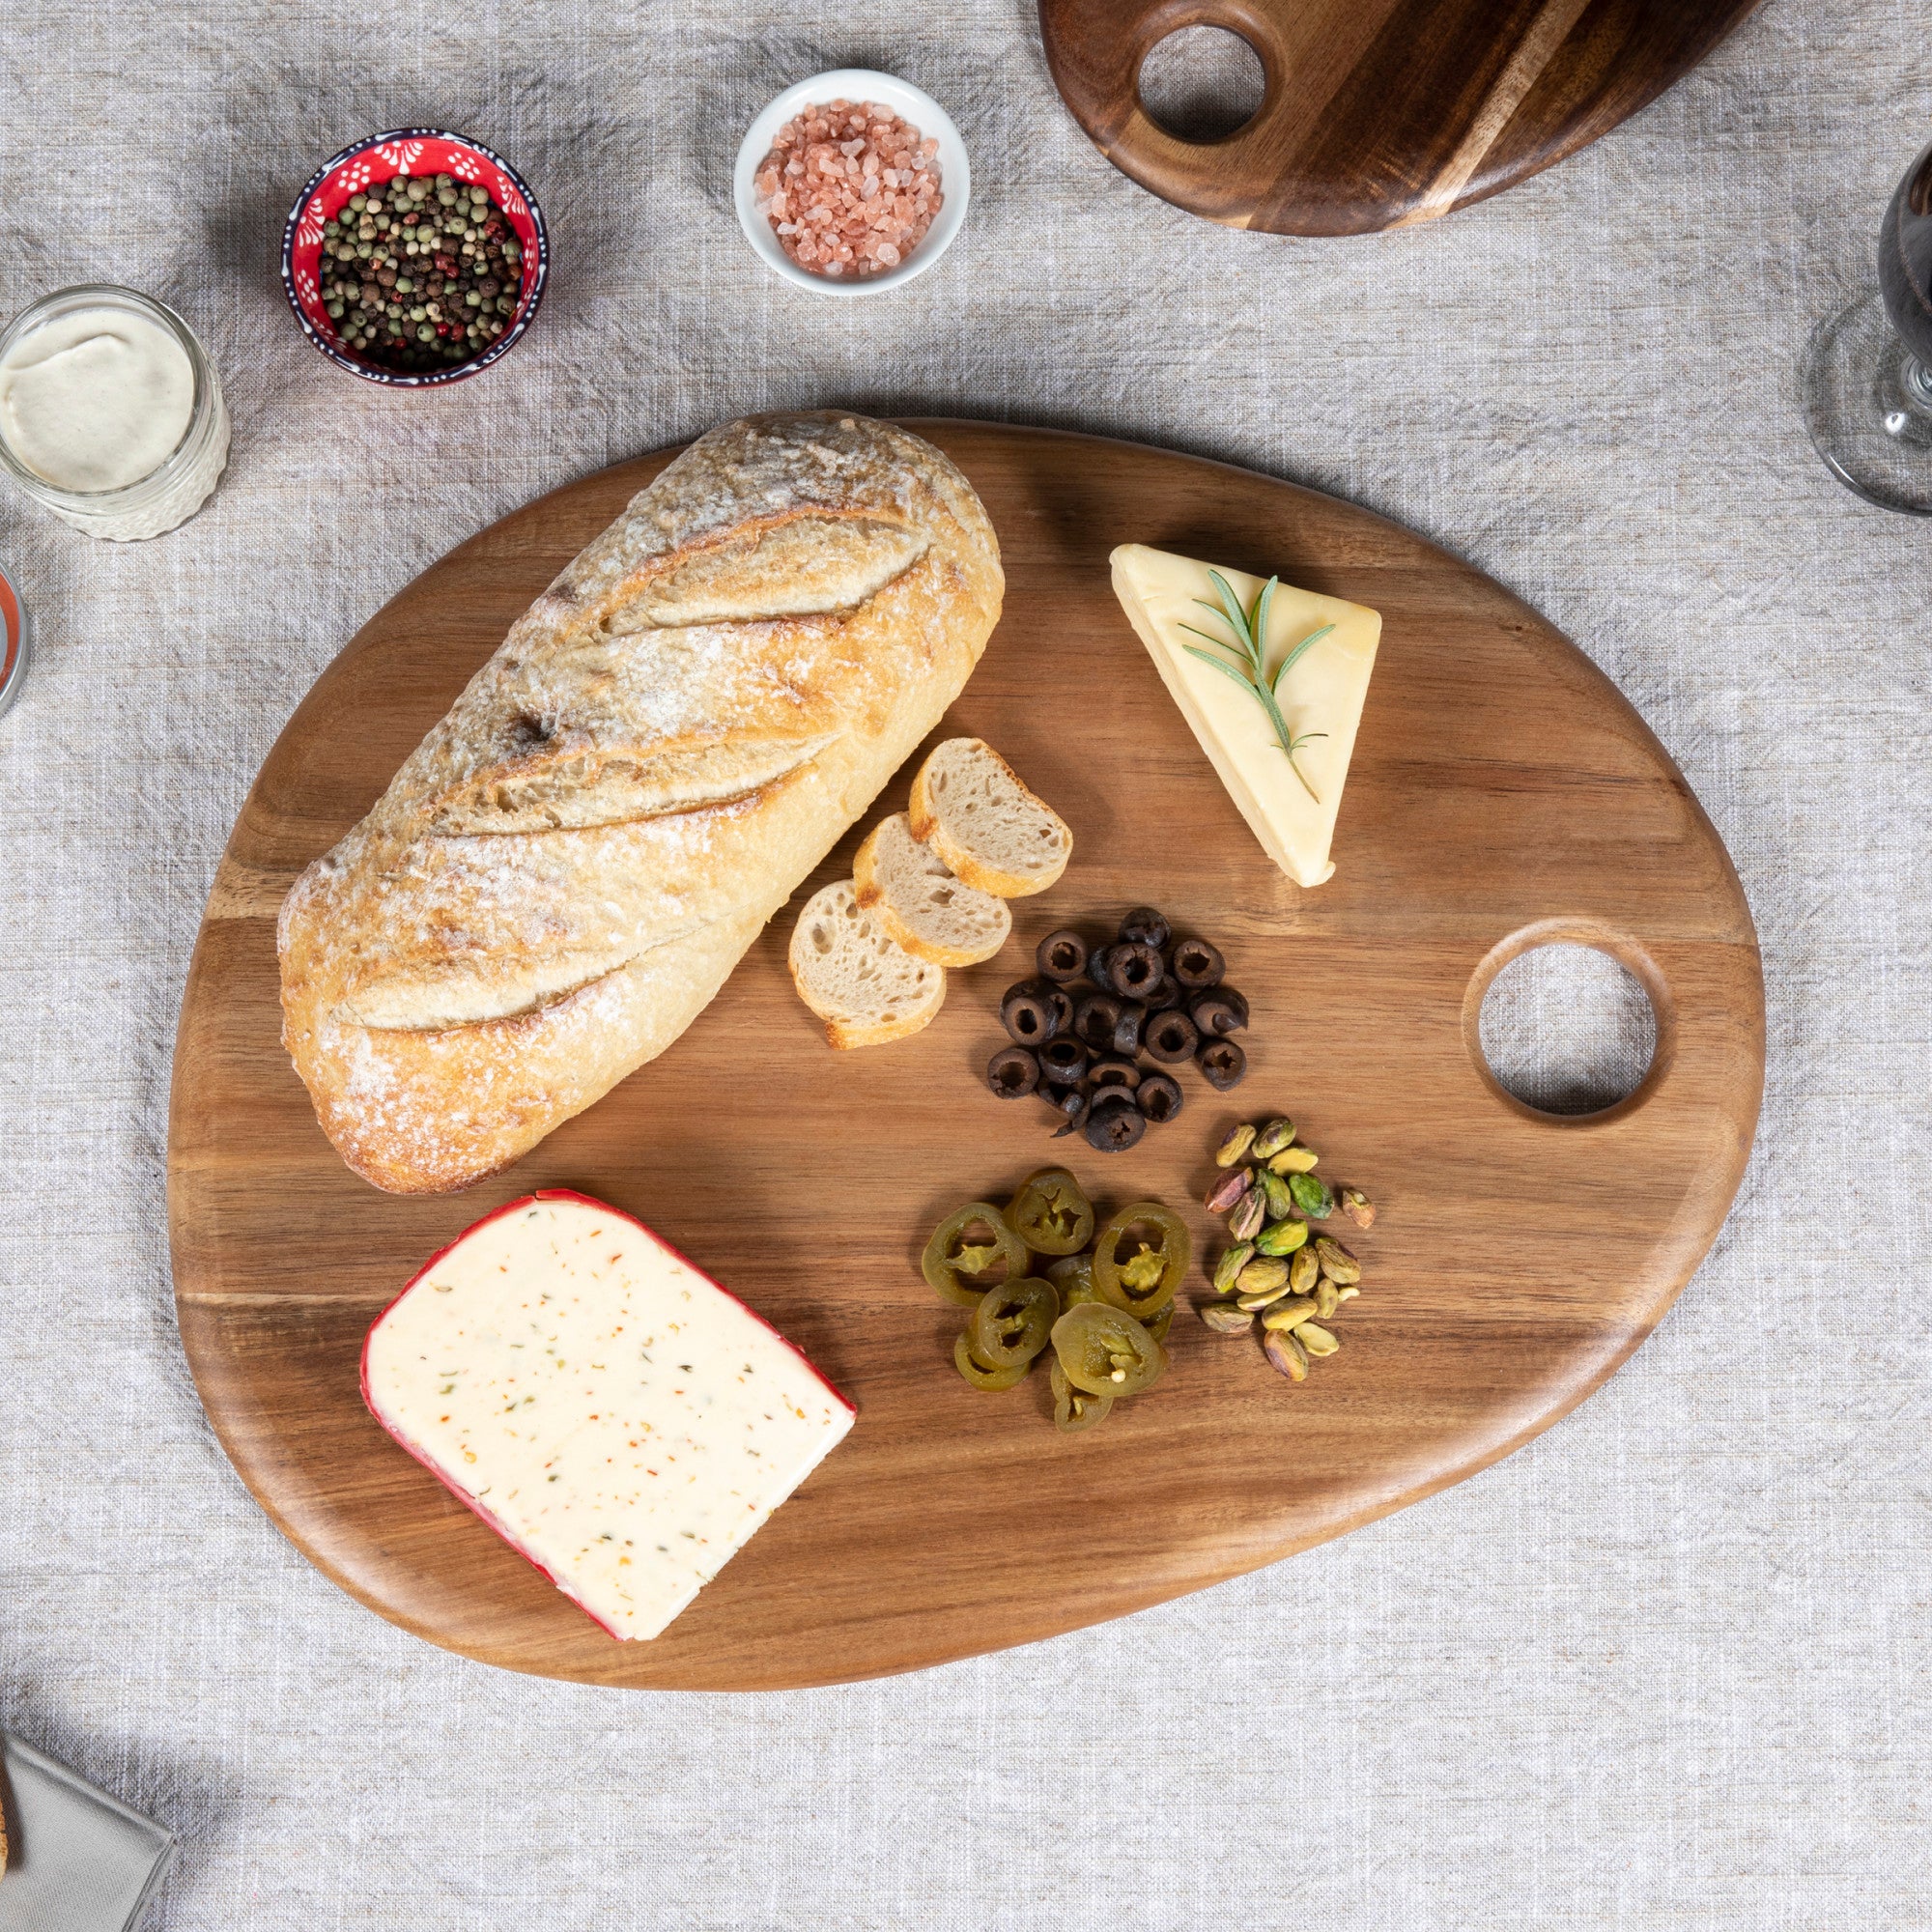 Small Paddle Shaped Bread Board by Proteak